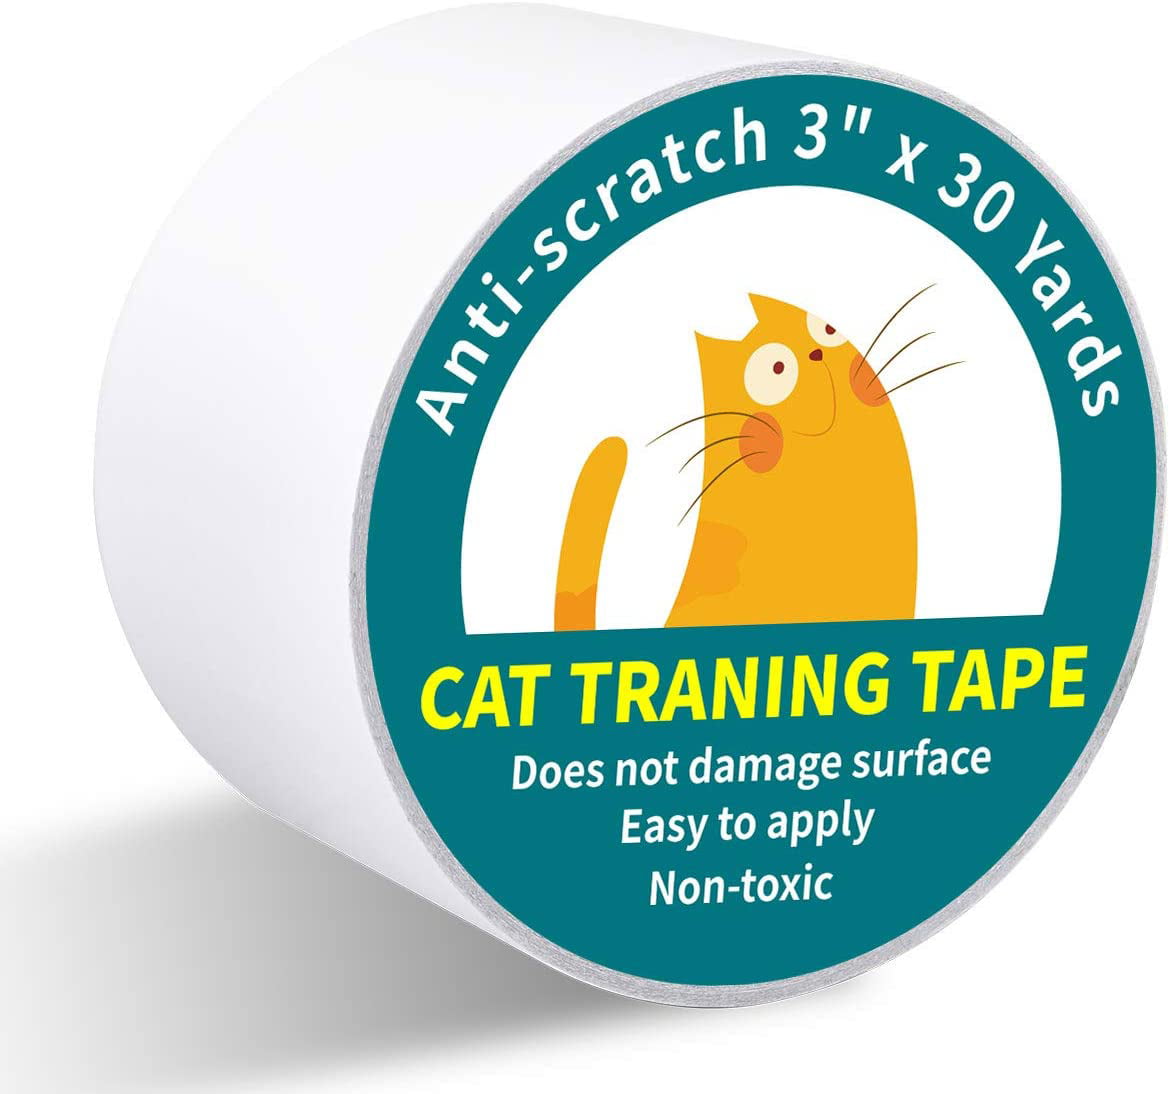 Doors Protecting Furniture none brand Cat Anti Scratch Tape Suitable for Cat Scratch Training Sofas Transparent Durable Three Sizes Carpets